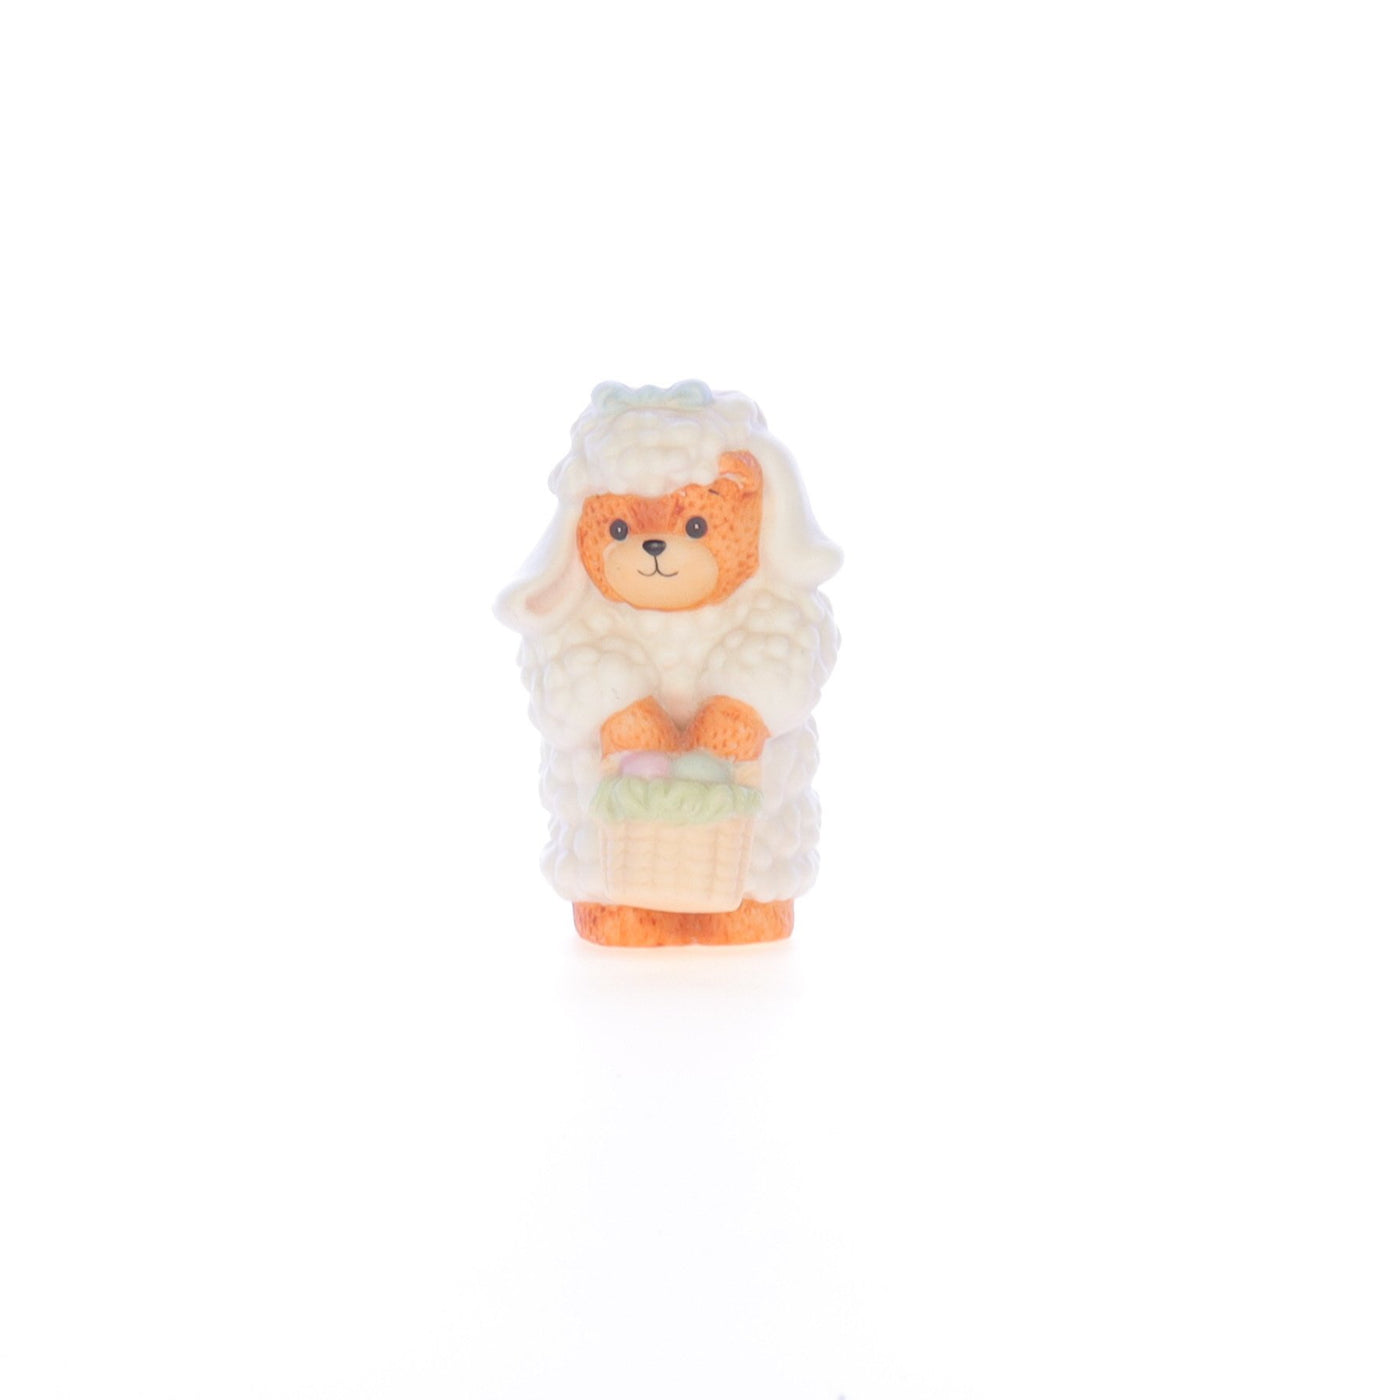 Lucy_And_Me_by_Lucy_Atwell_Porcelain_Figurine_Bear_in_Sheep_Costume_Lucy_Unknown_051_01